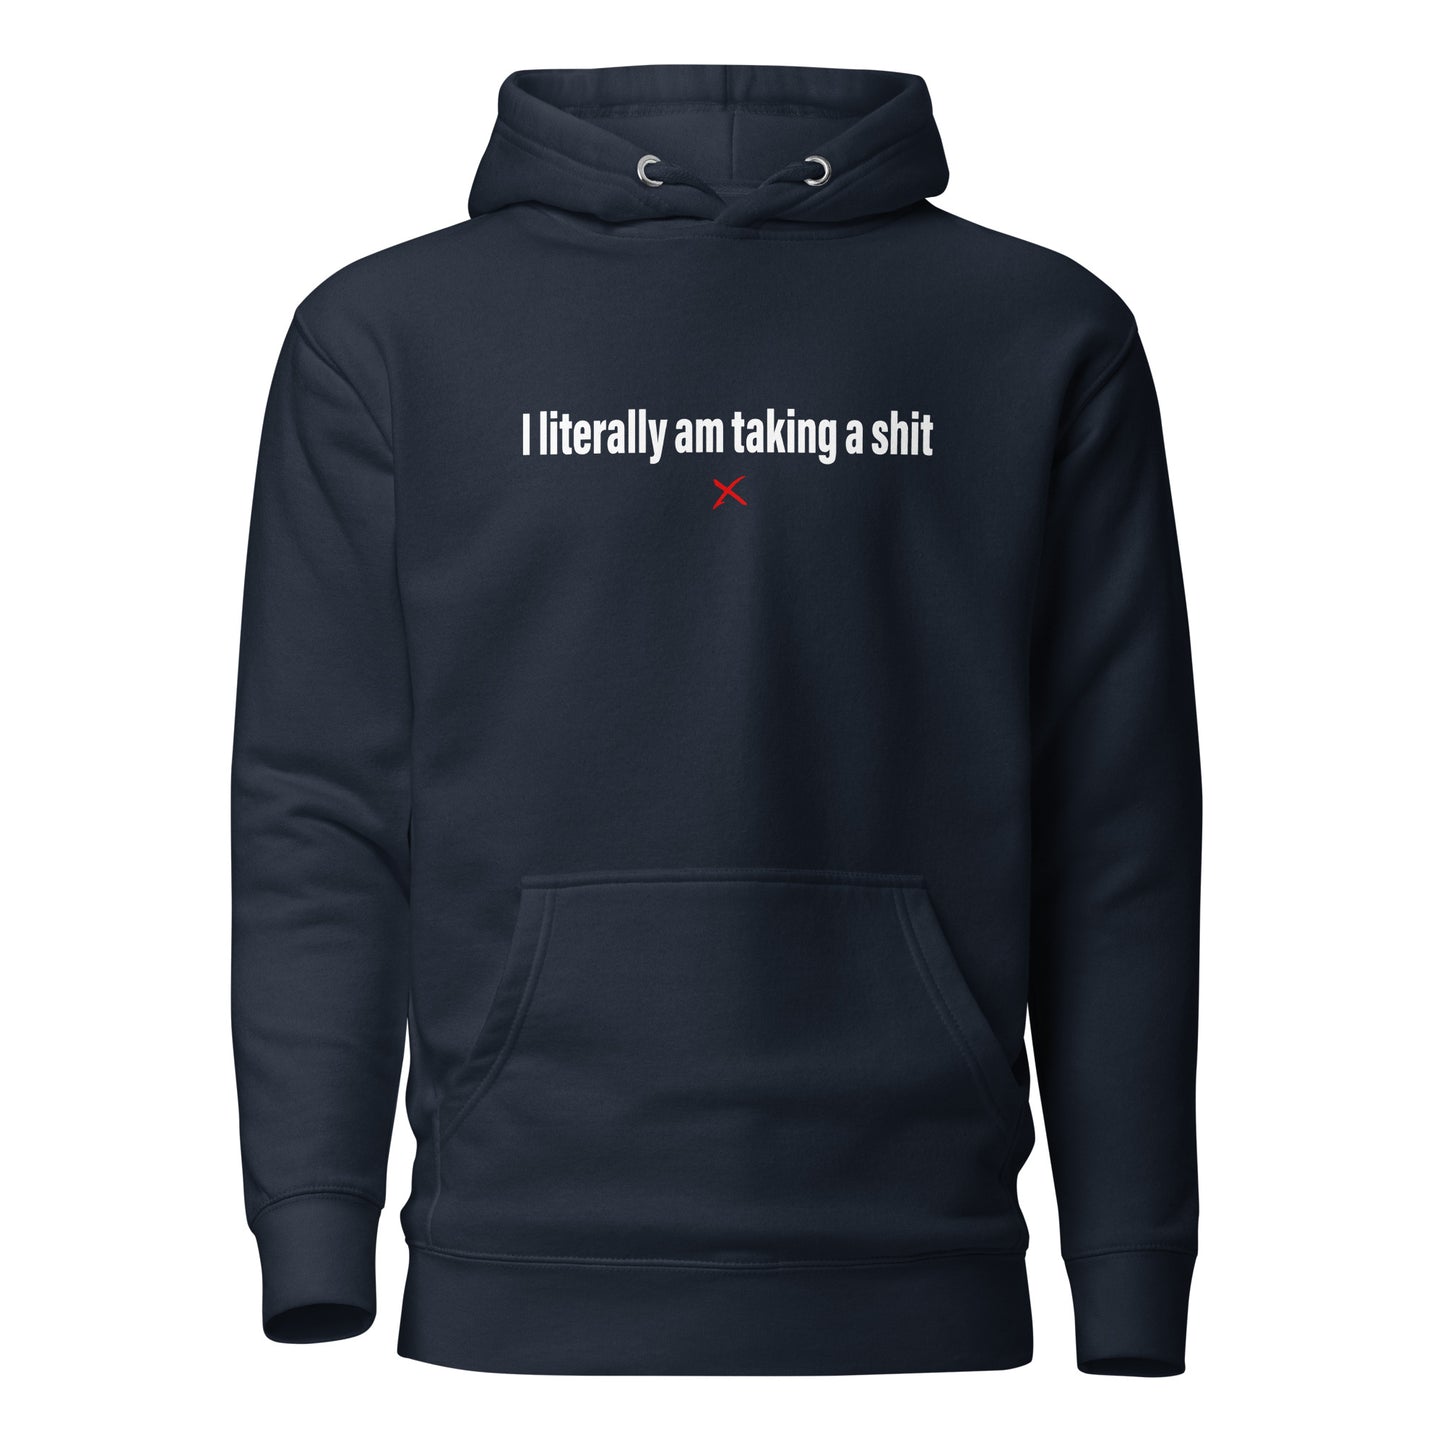 I literally am taking a shit - Hoodie